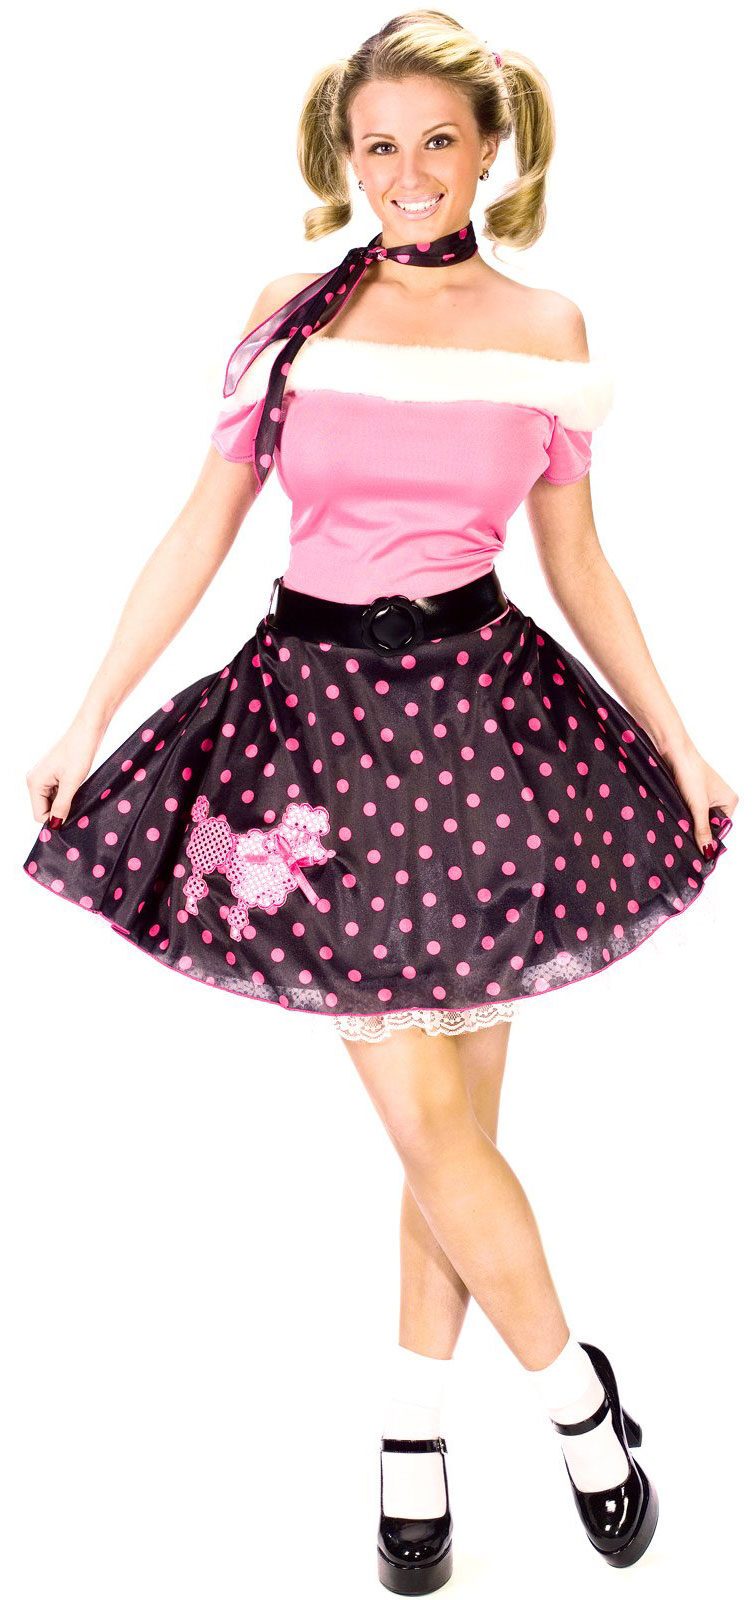 50s Costumes, Poodle Skirts